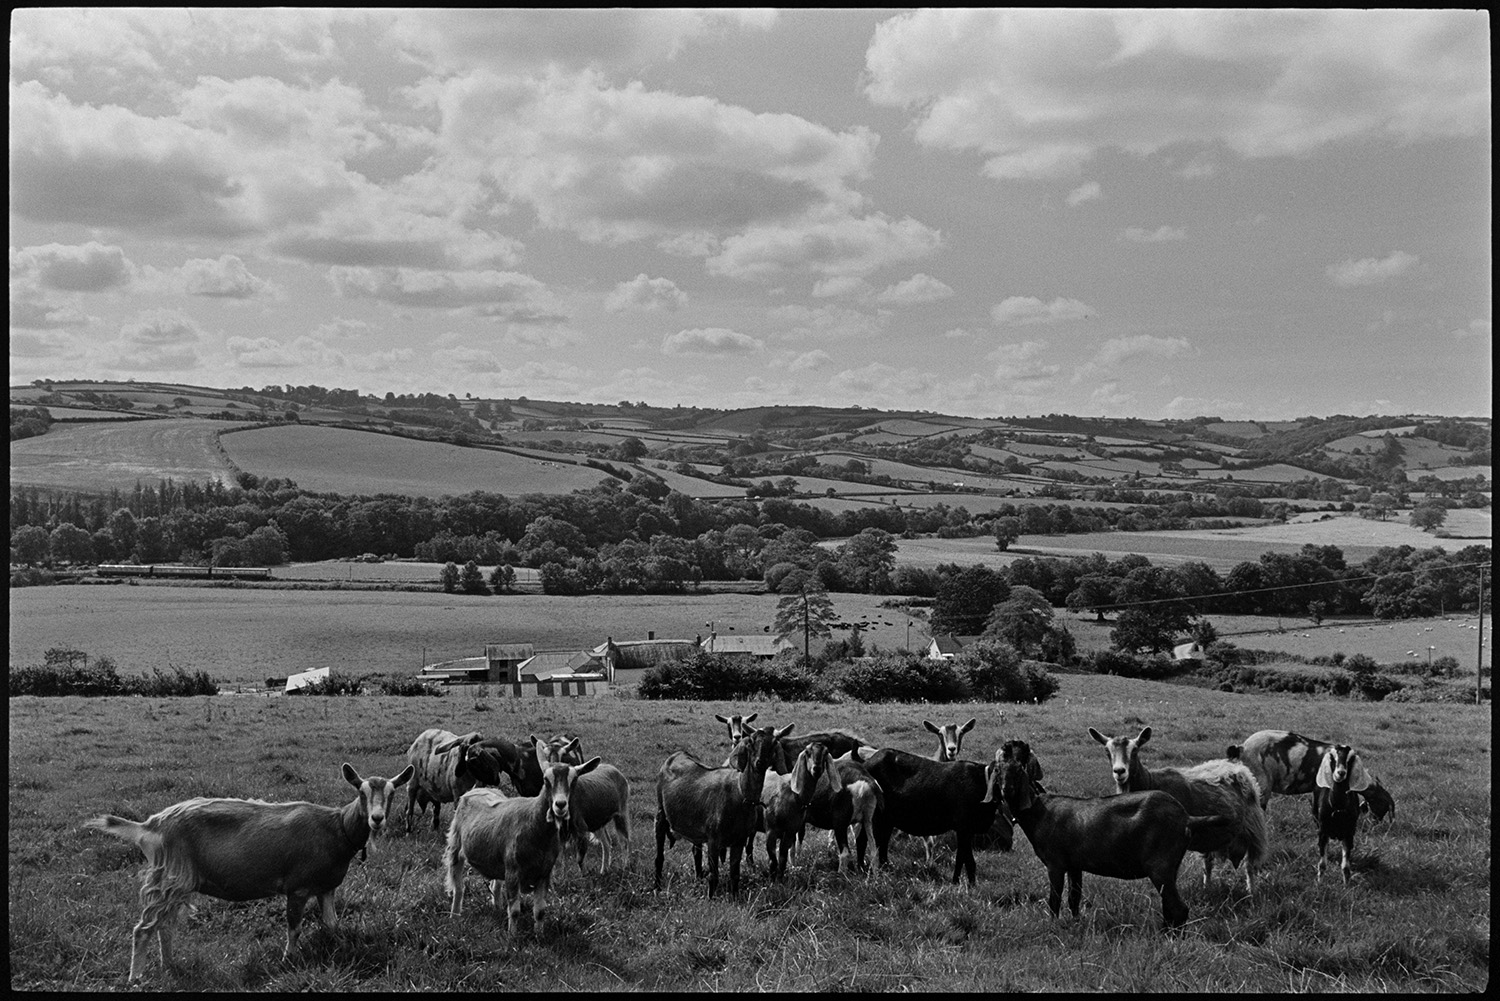 Cows and goats in fields of cheesemakers. 
[Goats in a field at Park Farm, Umberleigh. A landscape of fields, trees and hedgerows can be seen in the background, beyond the farm buildings. The farm made cheese and was run by Peter Charnley.]